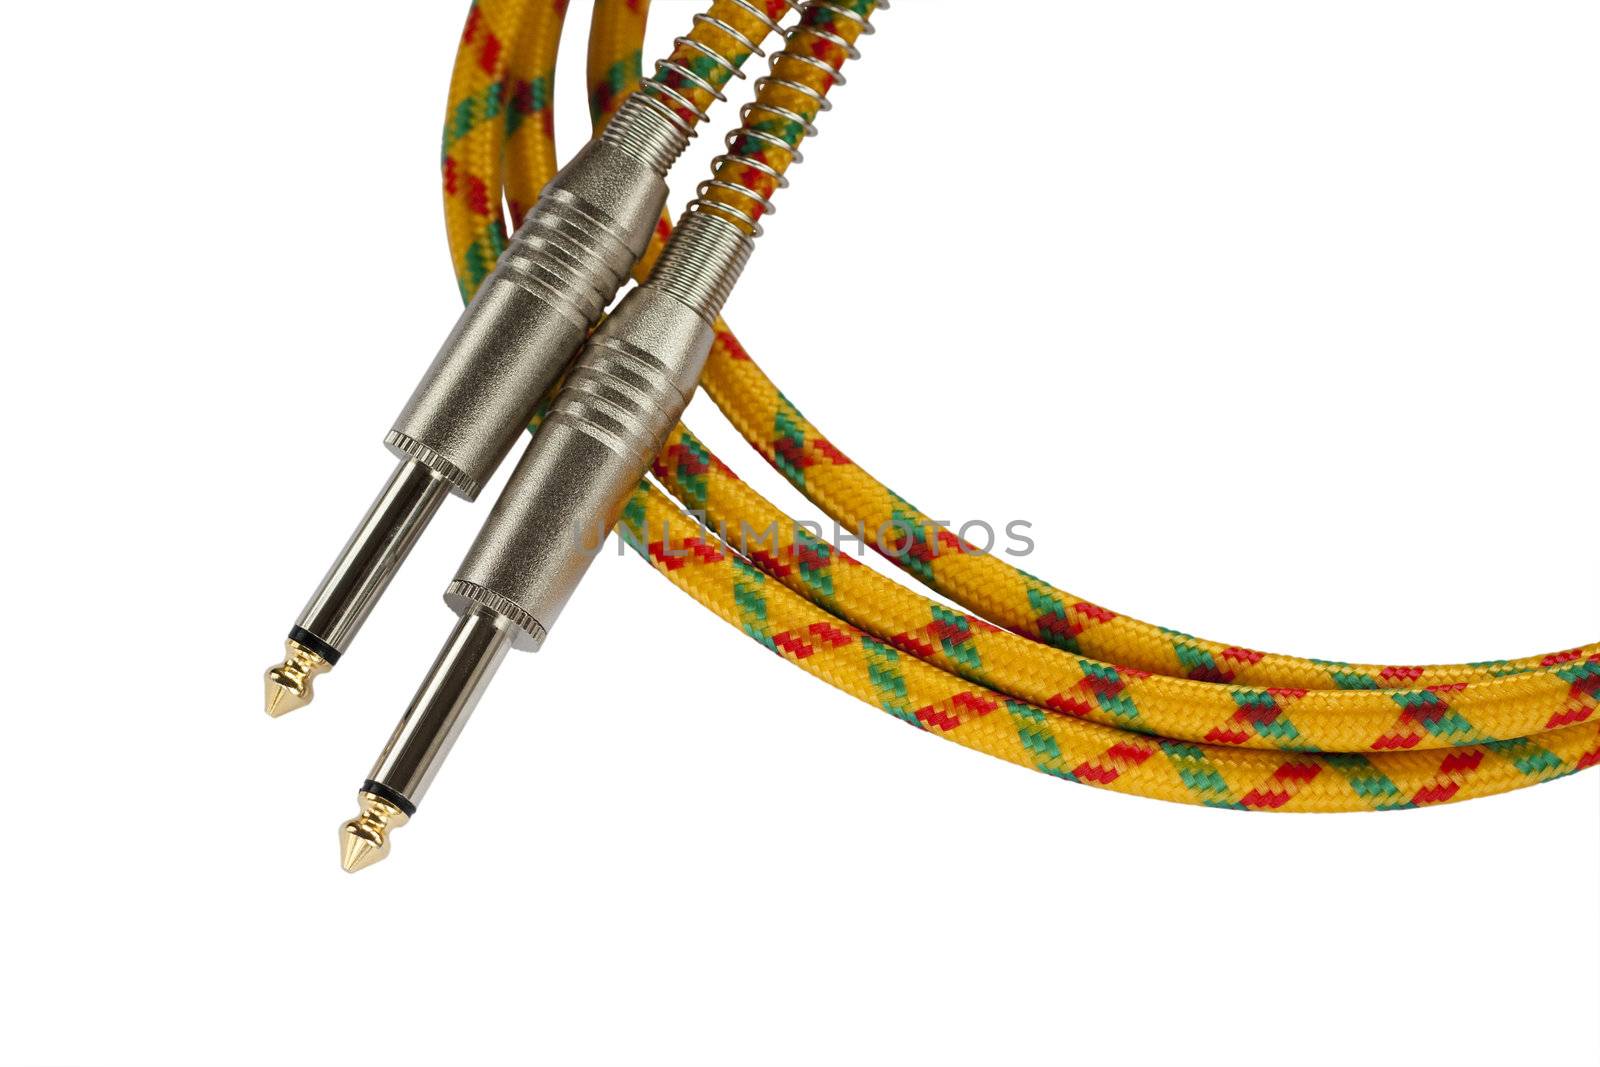 Vintage tweed cable and chrome plugs used for connecting musical instruments to amplifiers, isolated on white background.